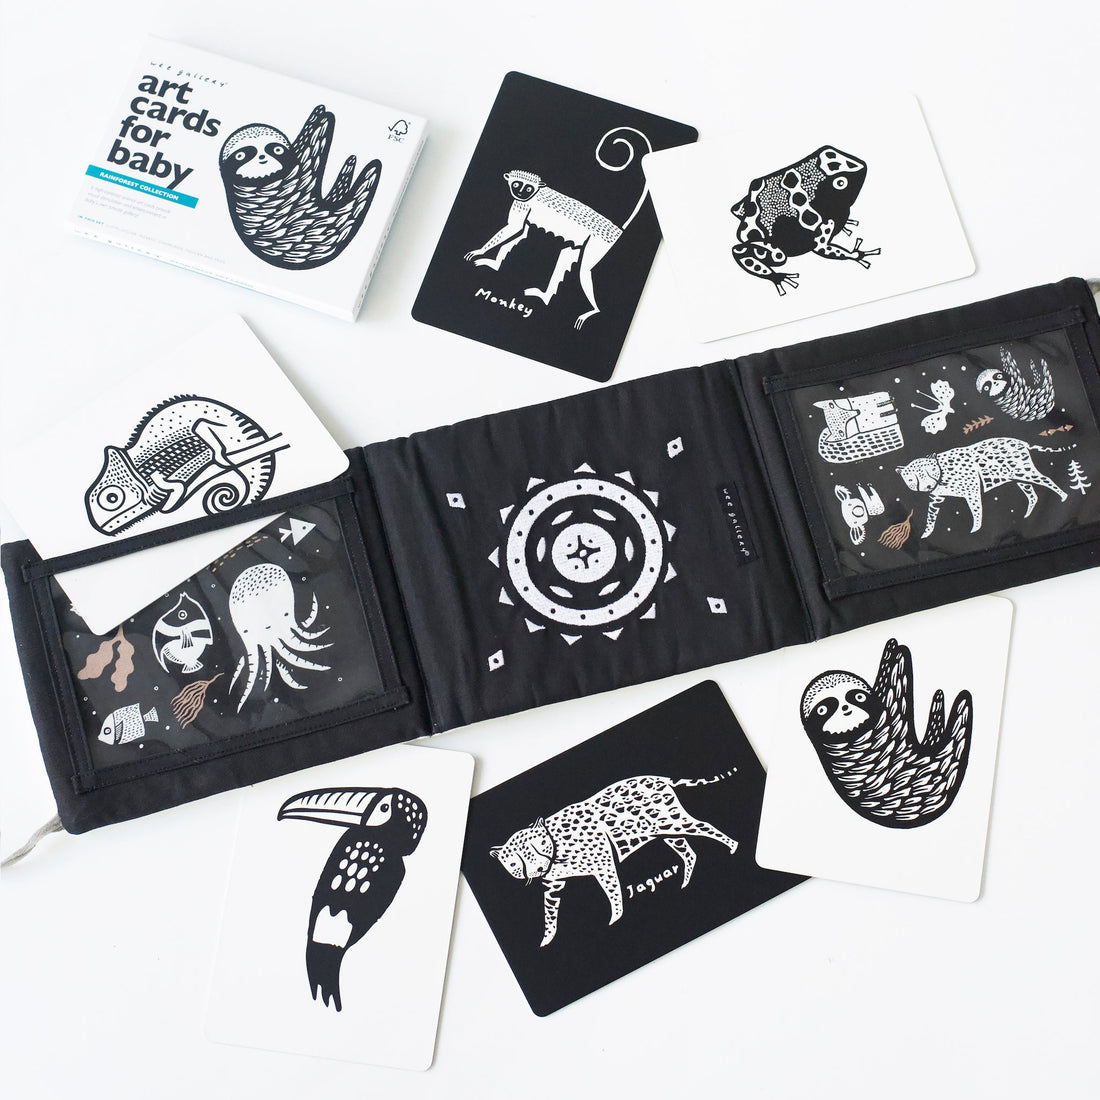 Wee Gallery Art Cards for Baby Black and White Collection